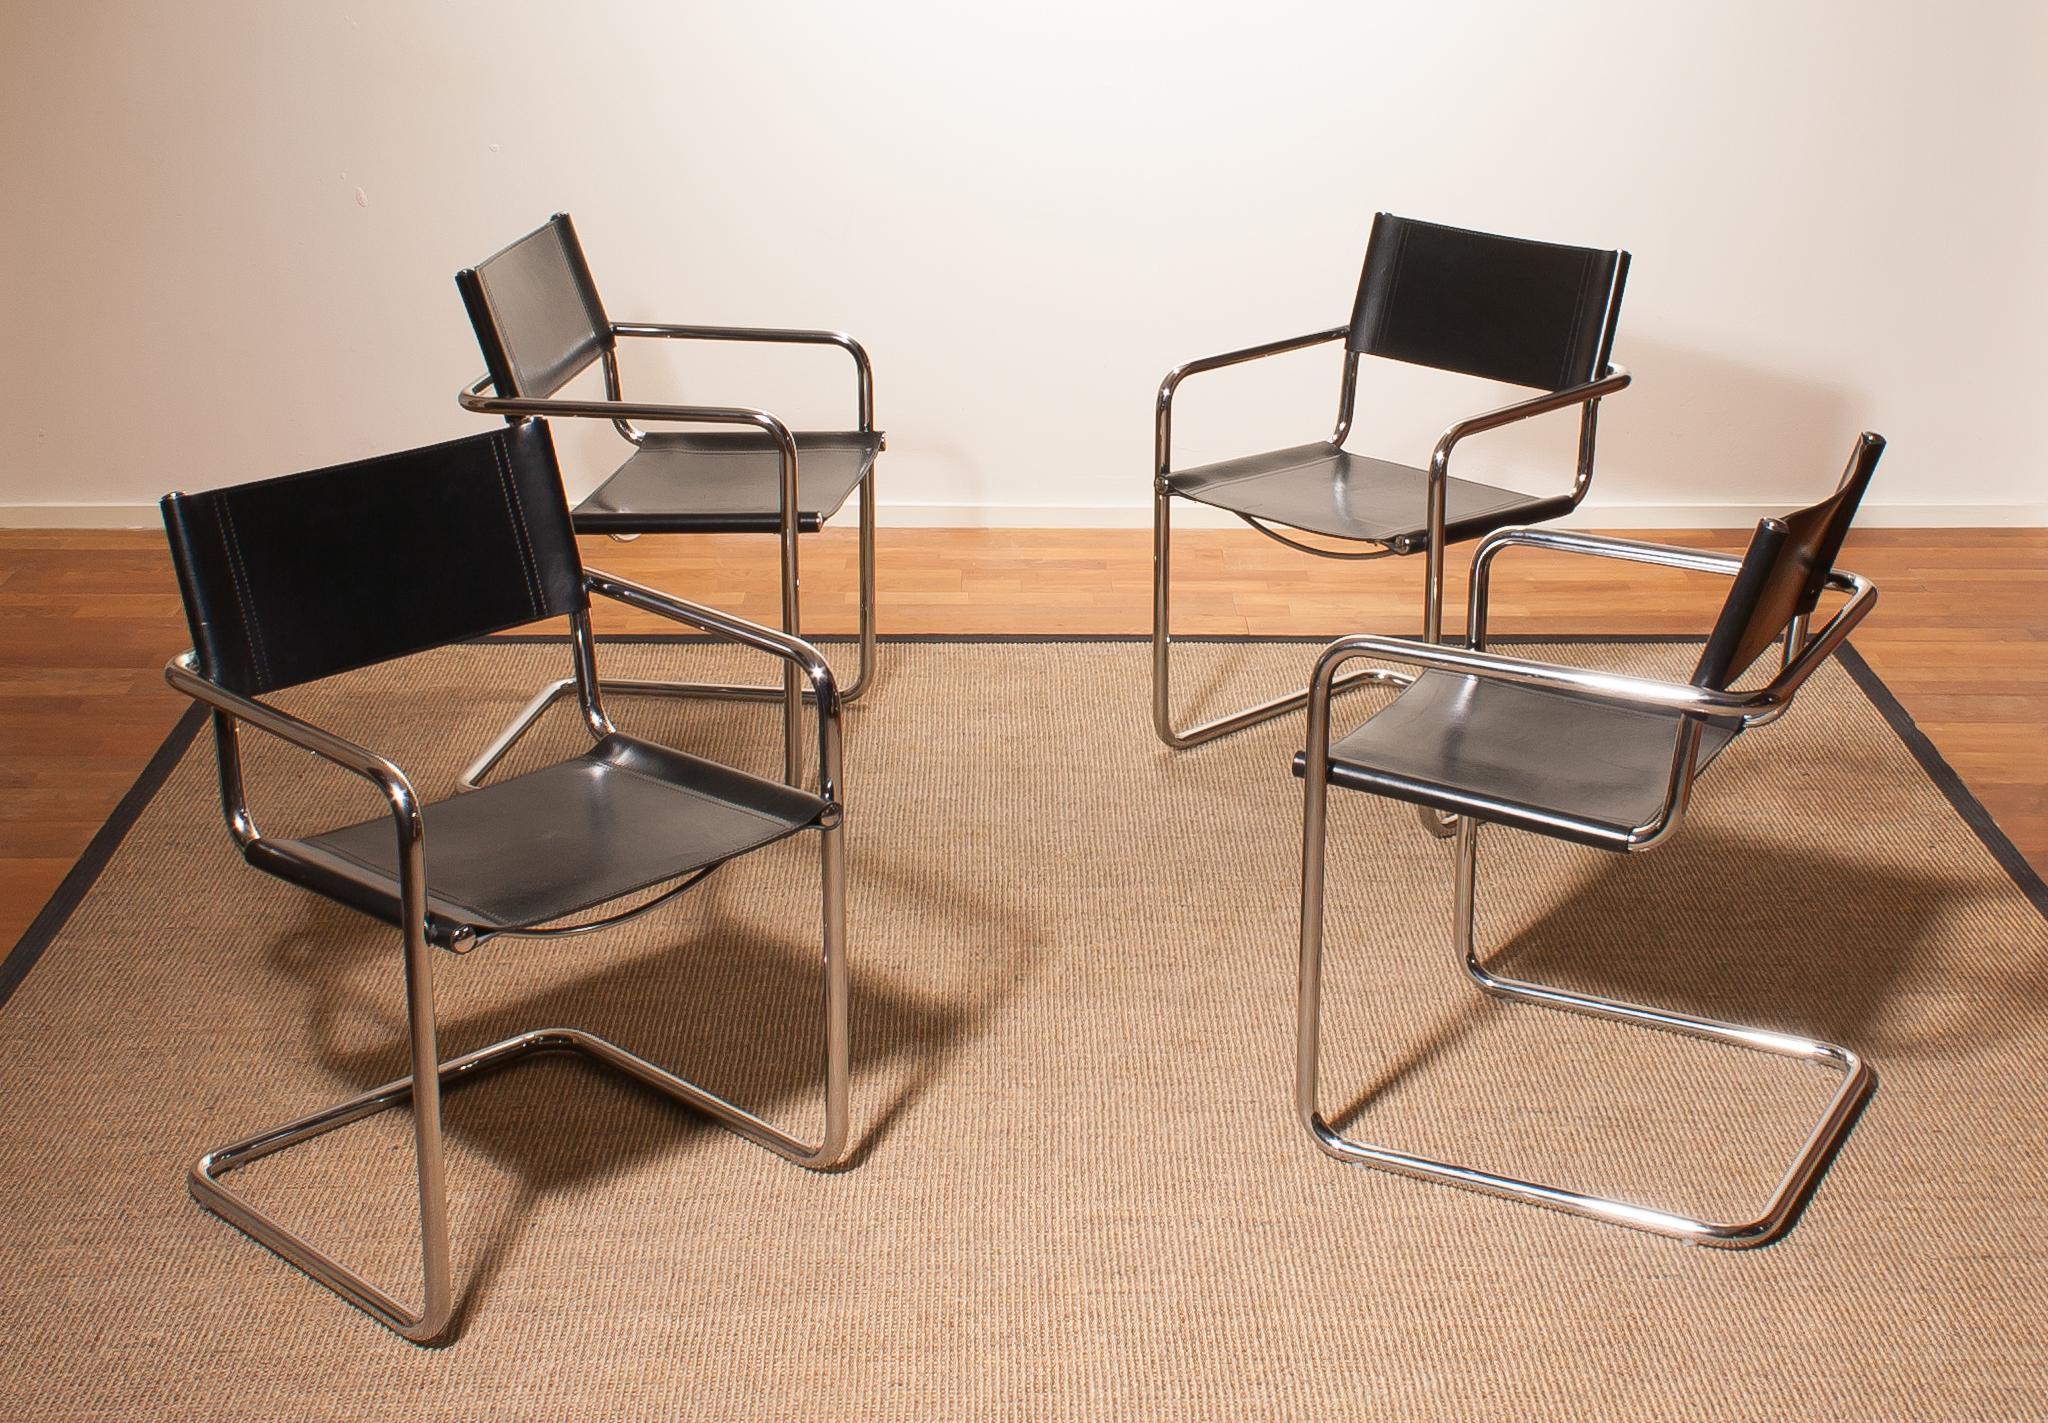 A beautiful set of four dining chairs made by Matteo Grassi, Italy.
The chairs have tubular chrome steel frames with sturdy black leather seating and backrest.
They are signed on the back of the backrest.
The chairs are in a very nice